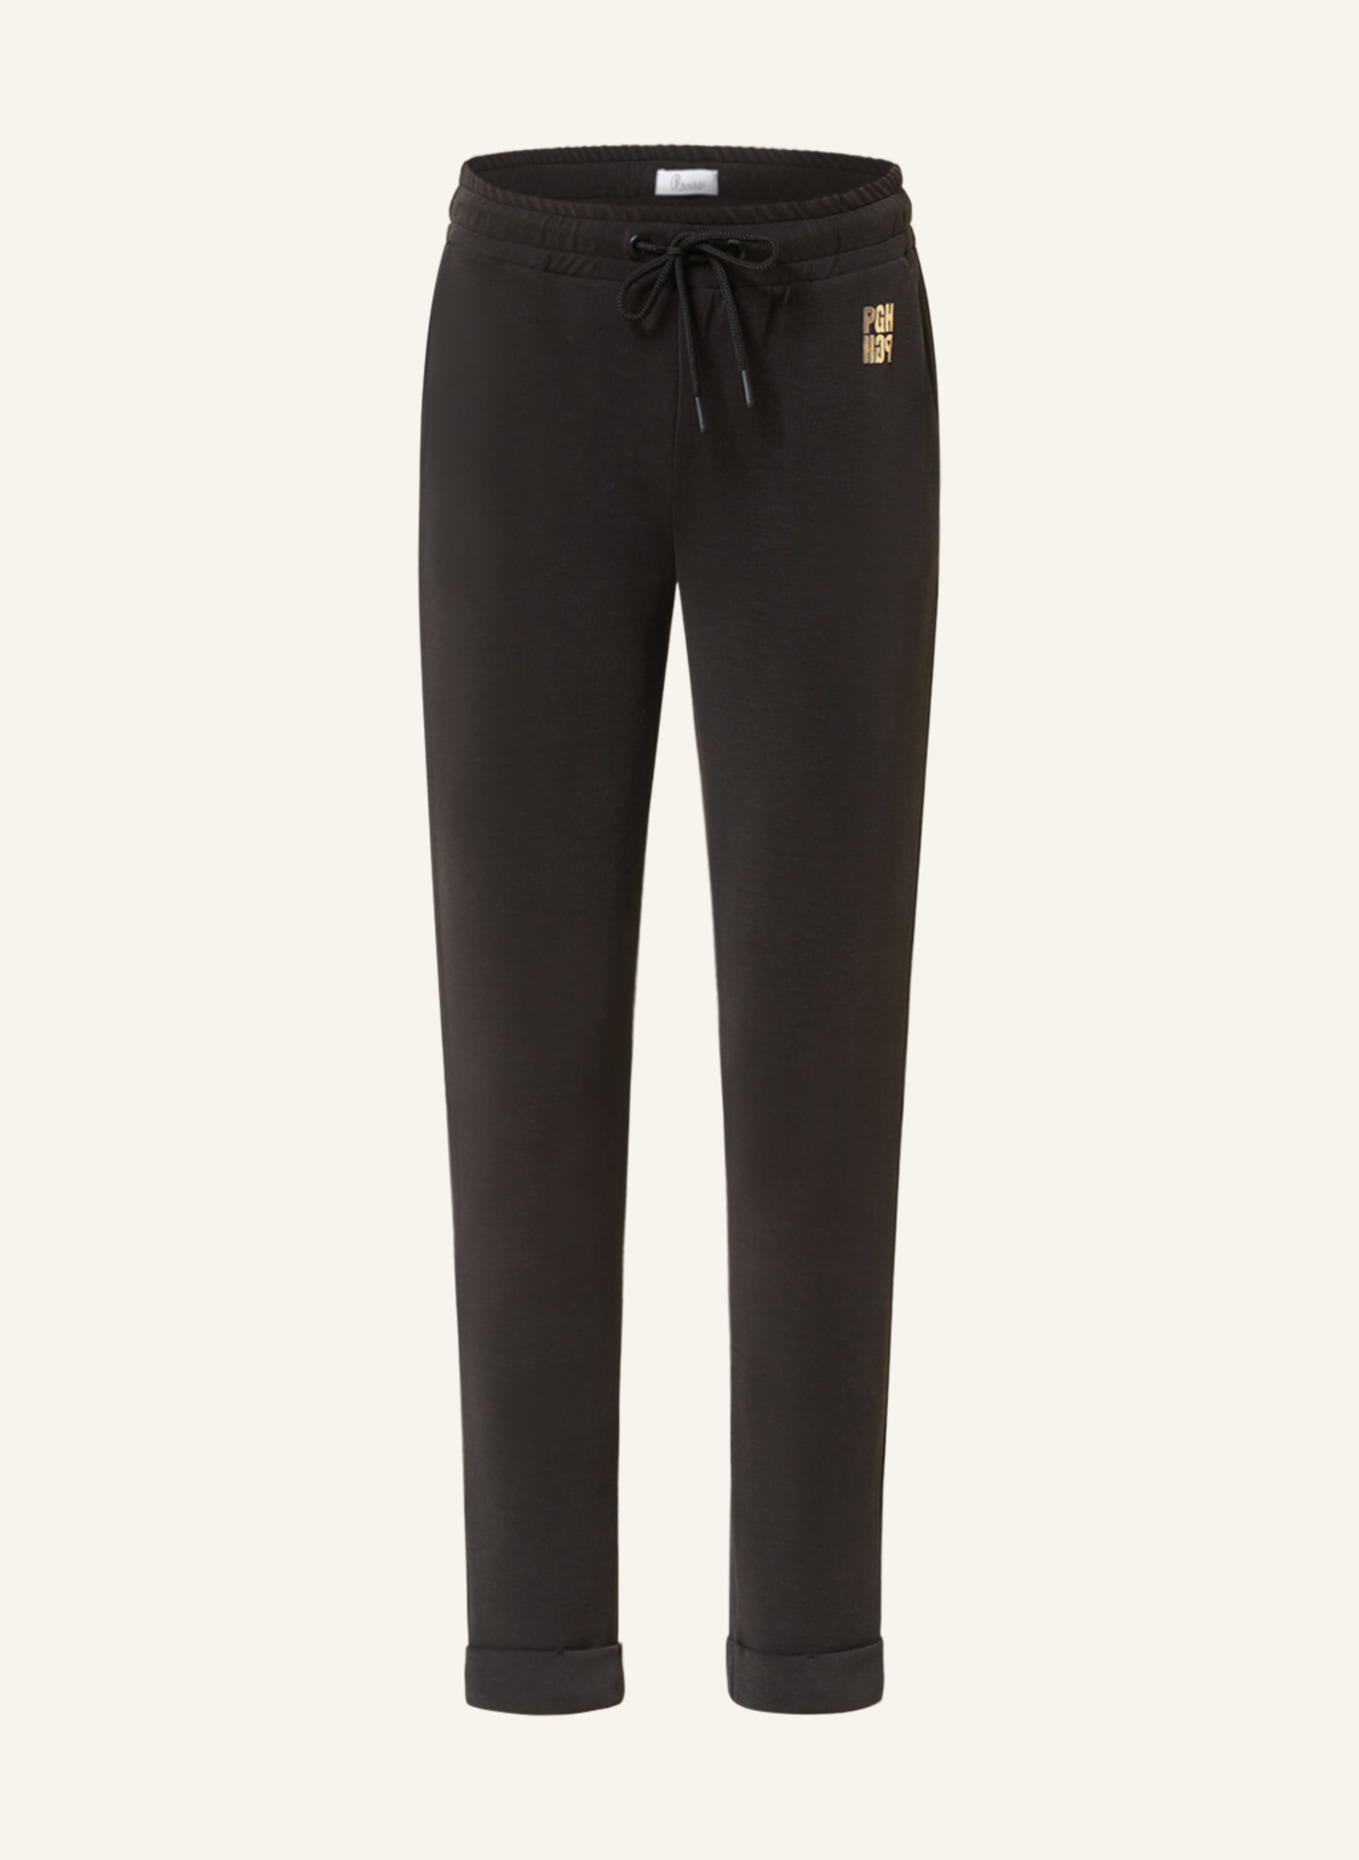 Princess GOES HOLLYWOOD Pants in jogger style, Color: BLACK (Image 1)